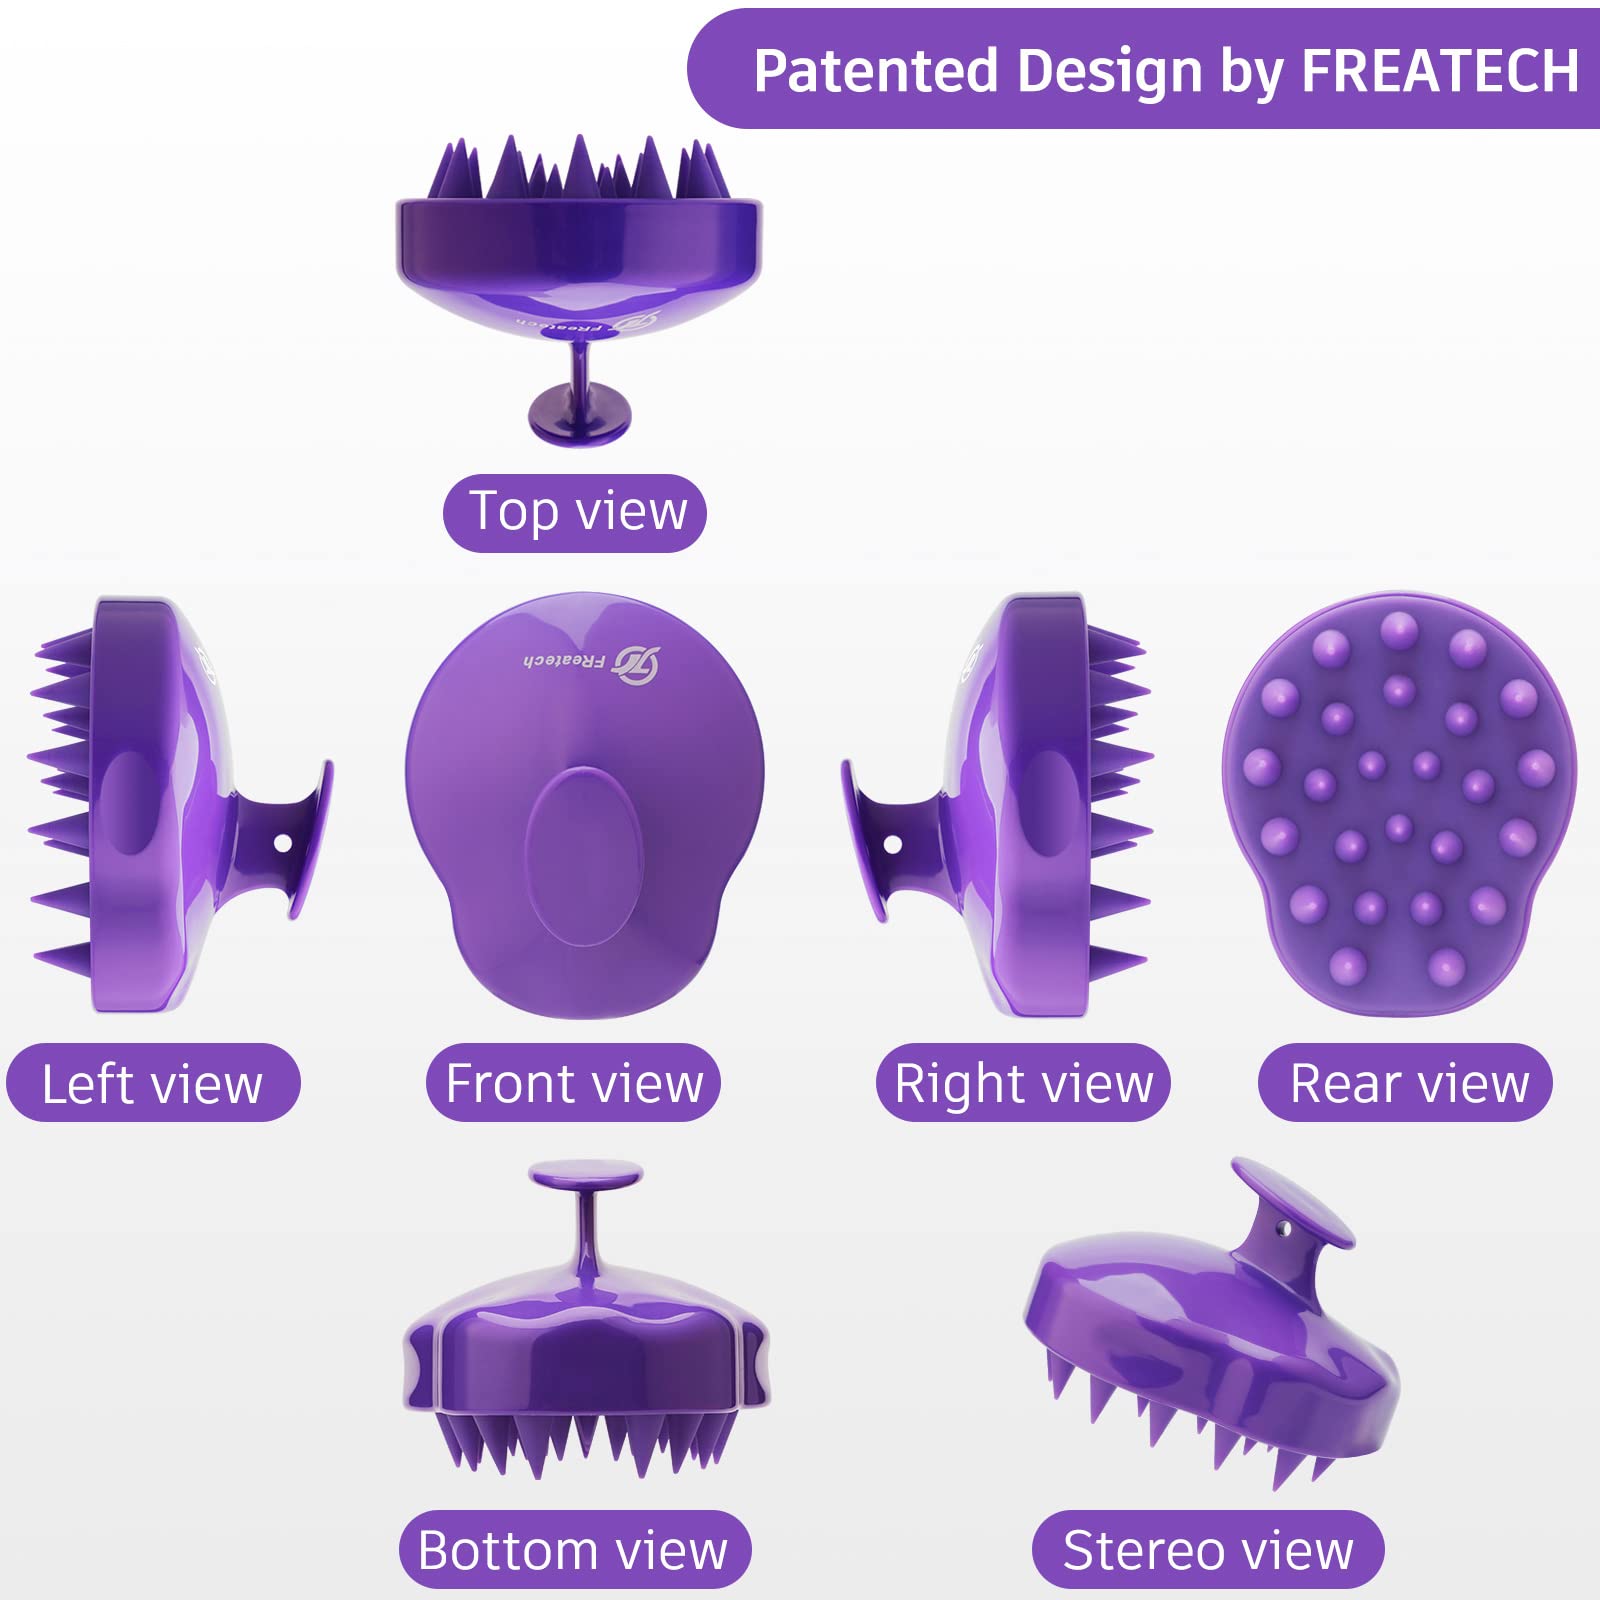 FREATECH Hair Scalp Massager Shampoo Brush with Soft Silicone Bristles for Scalp Care and Hair Growth, Shower Head Scalp Scrubber Exfoliator for Dandruff, Wet & Dry for Men, Women and Kids, Purple